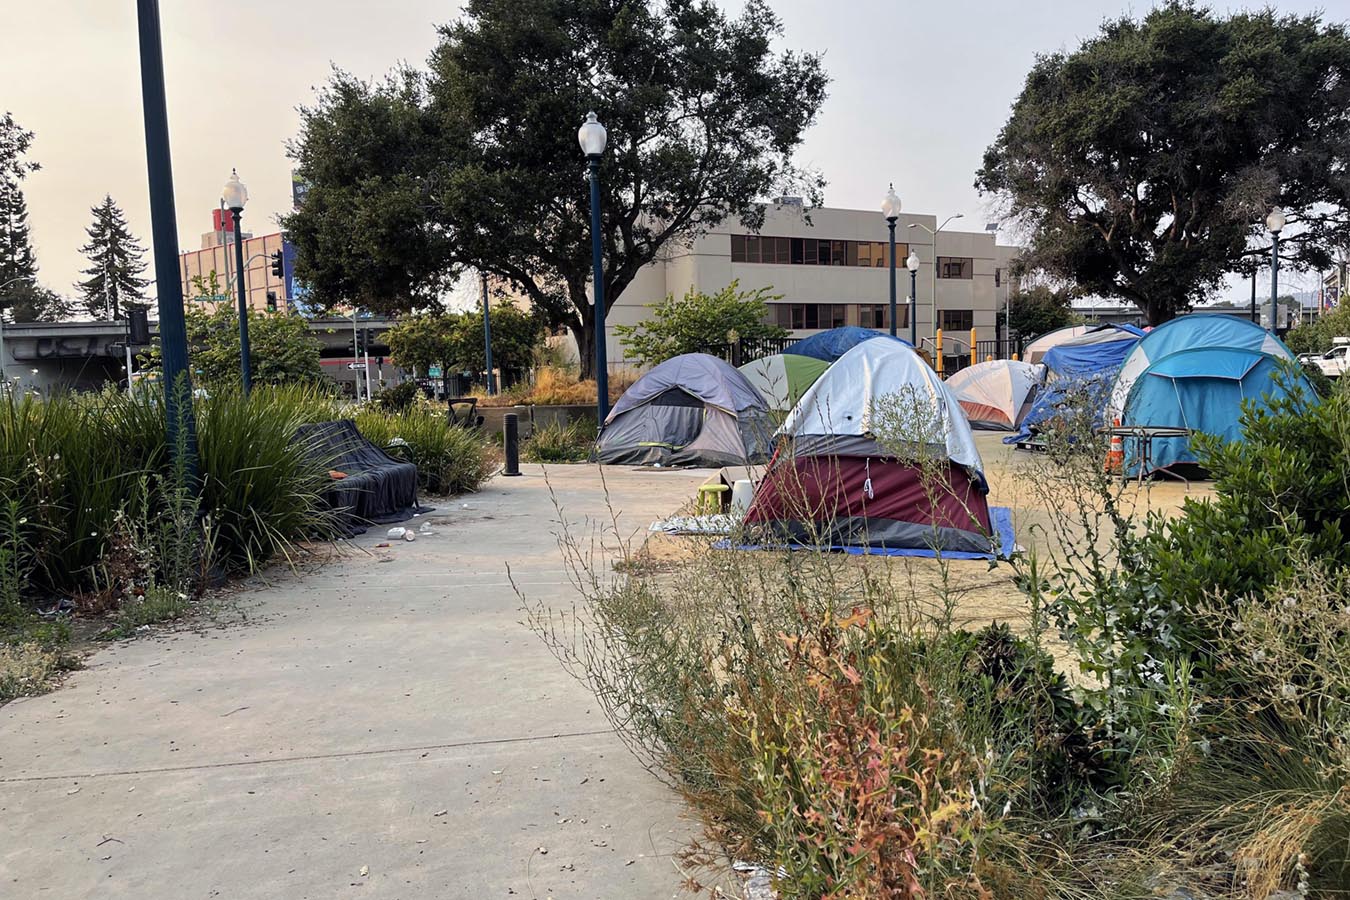 A row of tents alongside a cement sidewalk in an urban park surrounded by buildings.